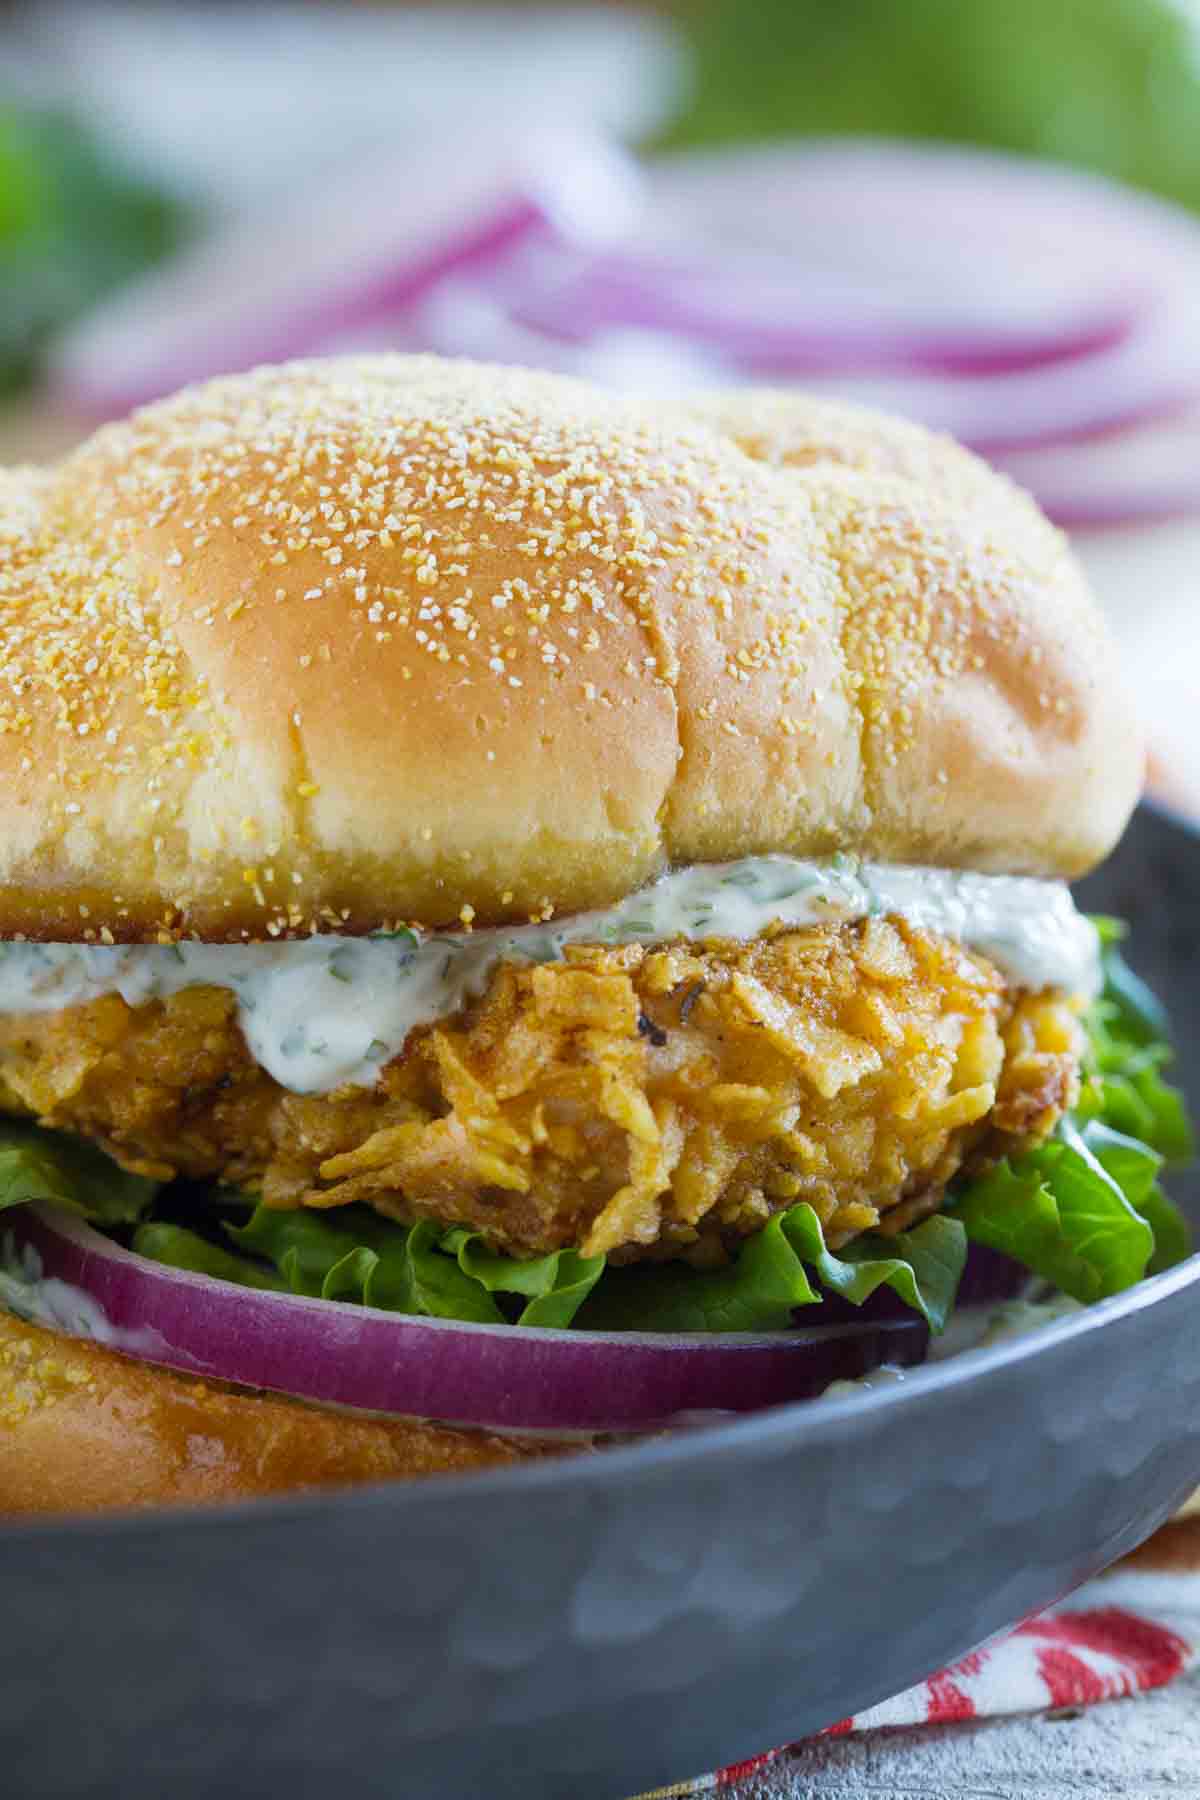 Spicy Chicken Sandwich topped with Cilantro Lime Mayo